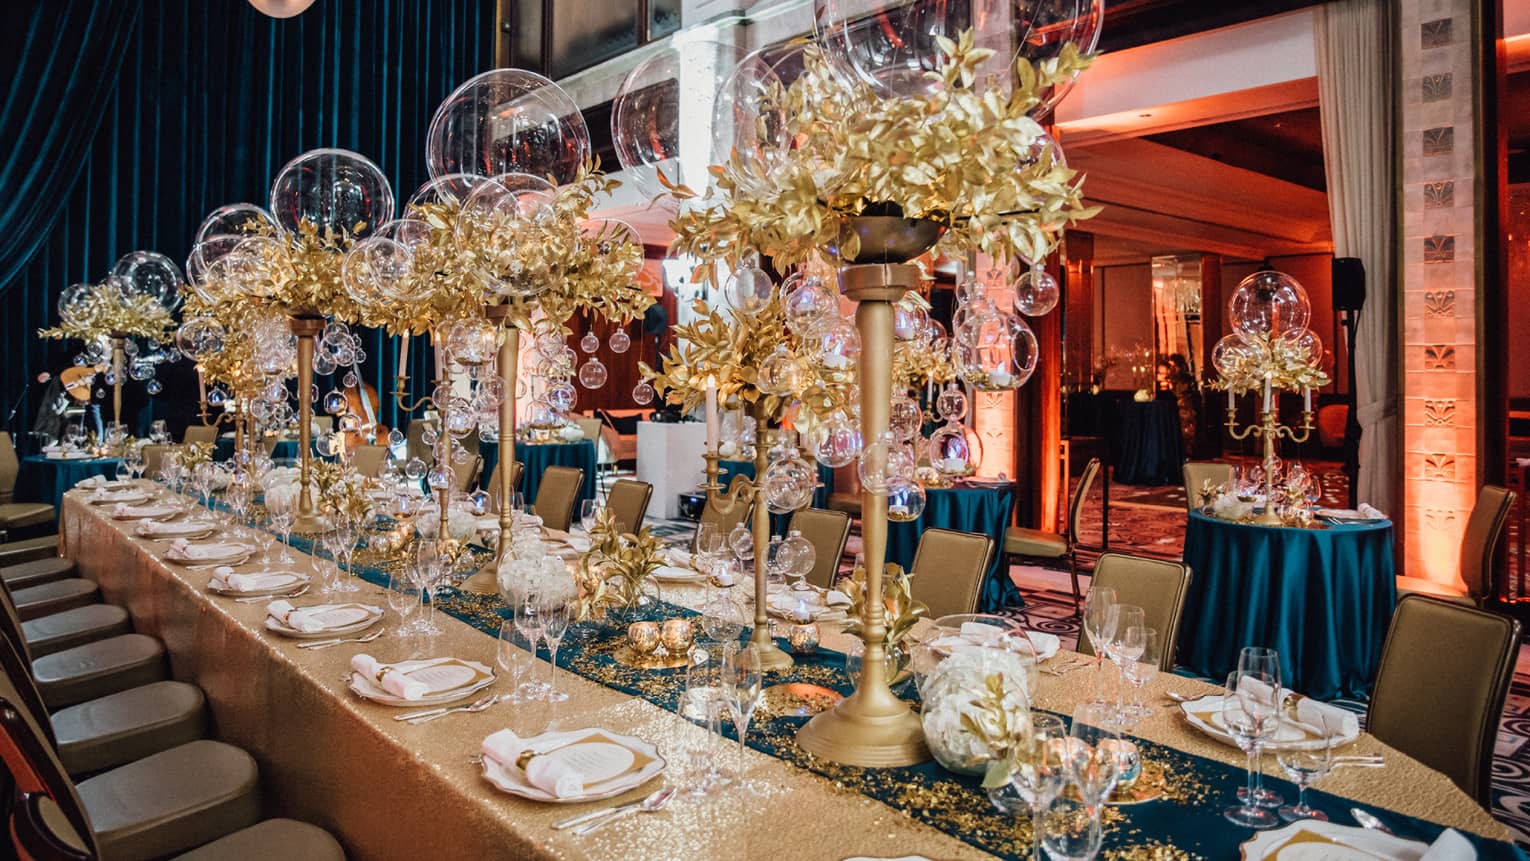 Long gold table with turquoise runner and gold candelabras with gold trim and glass balls